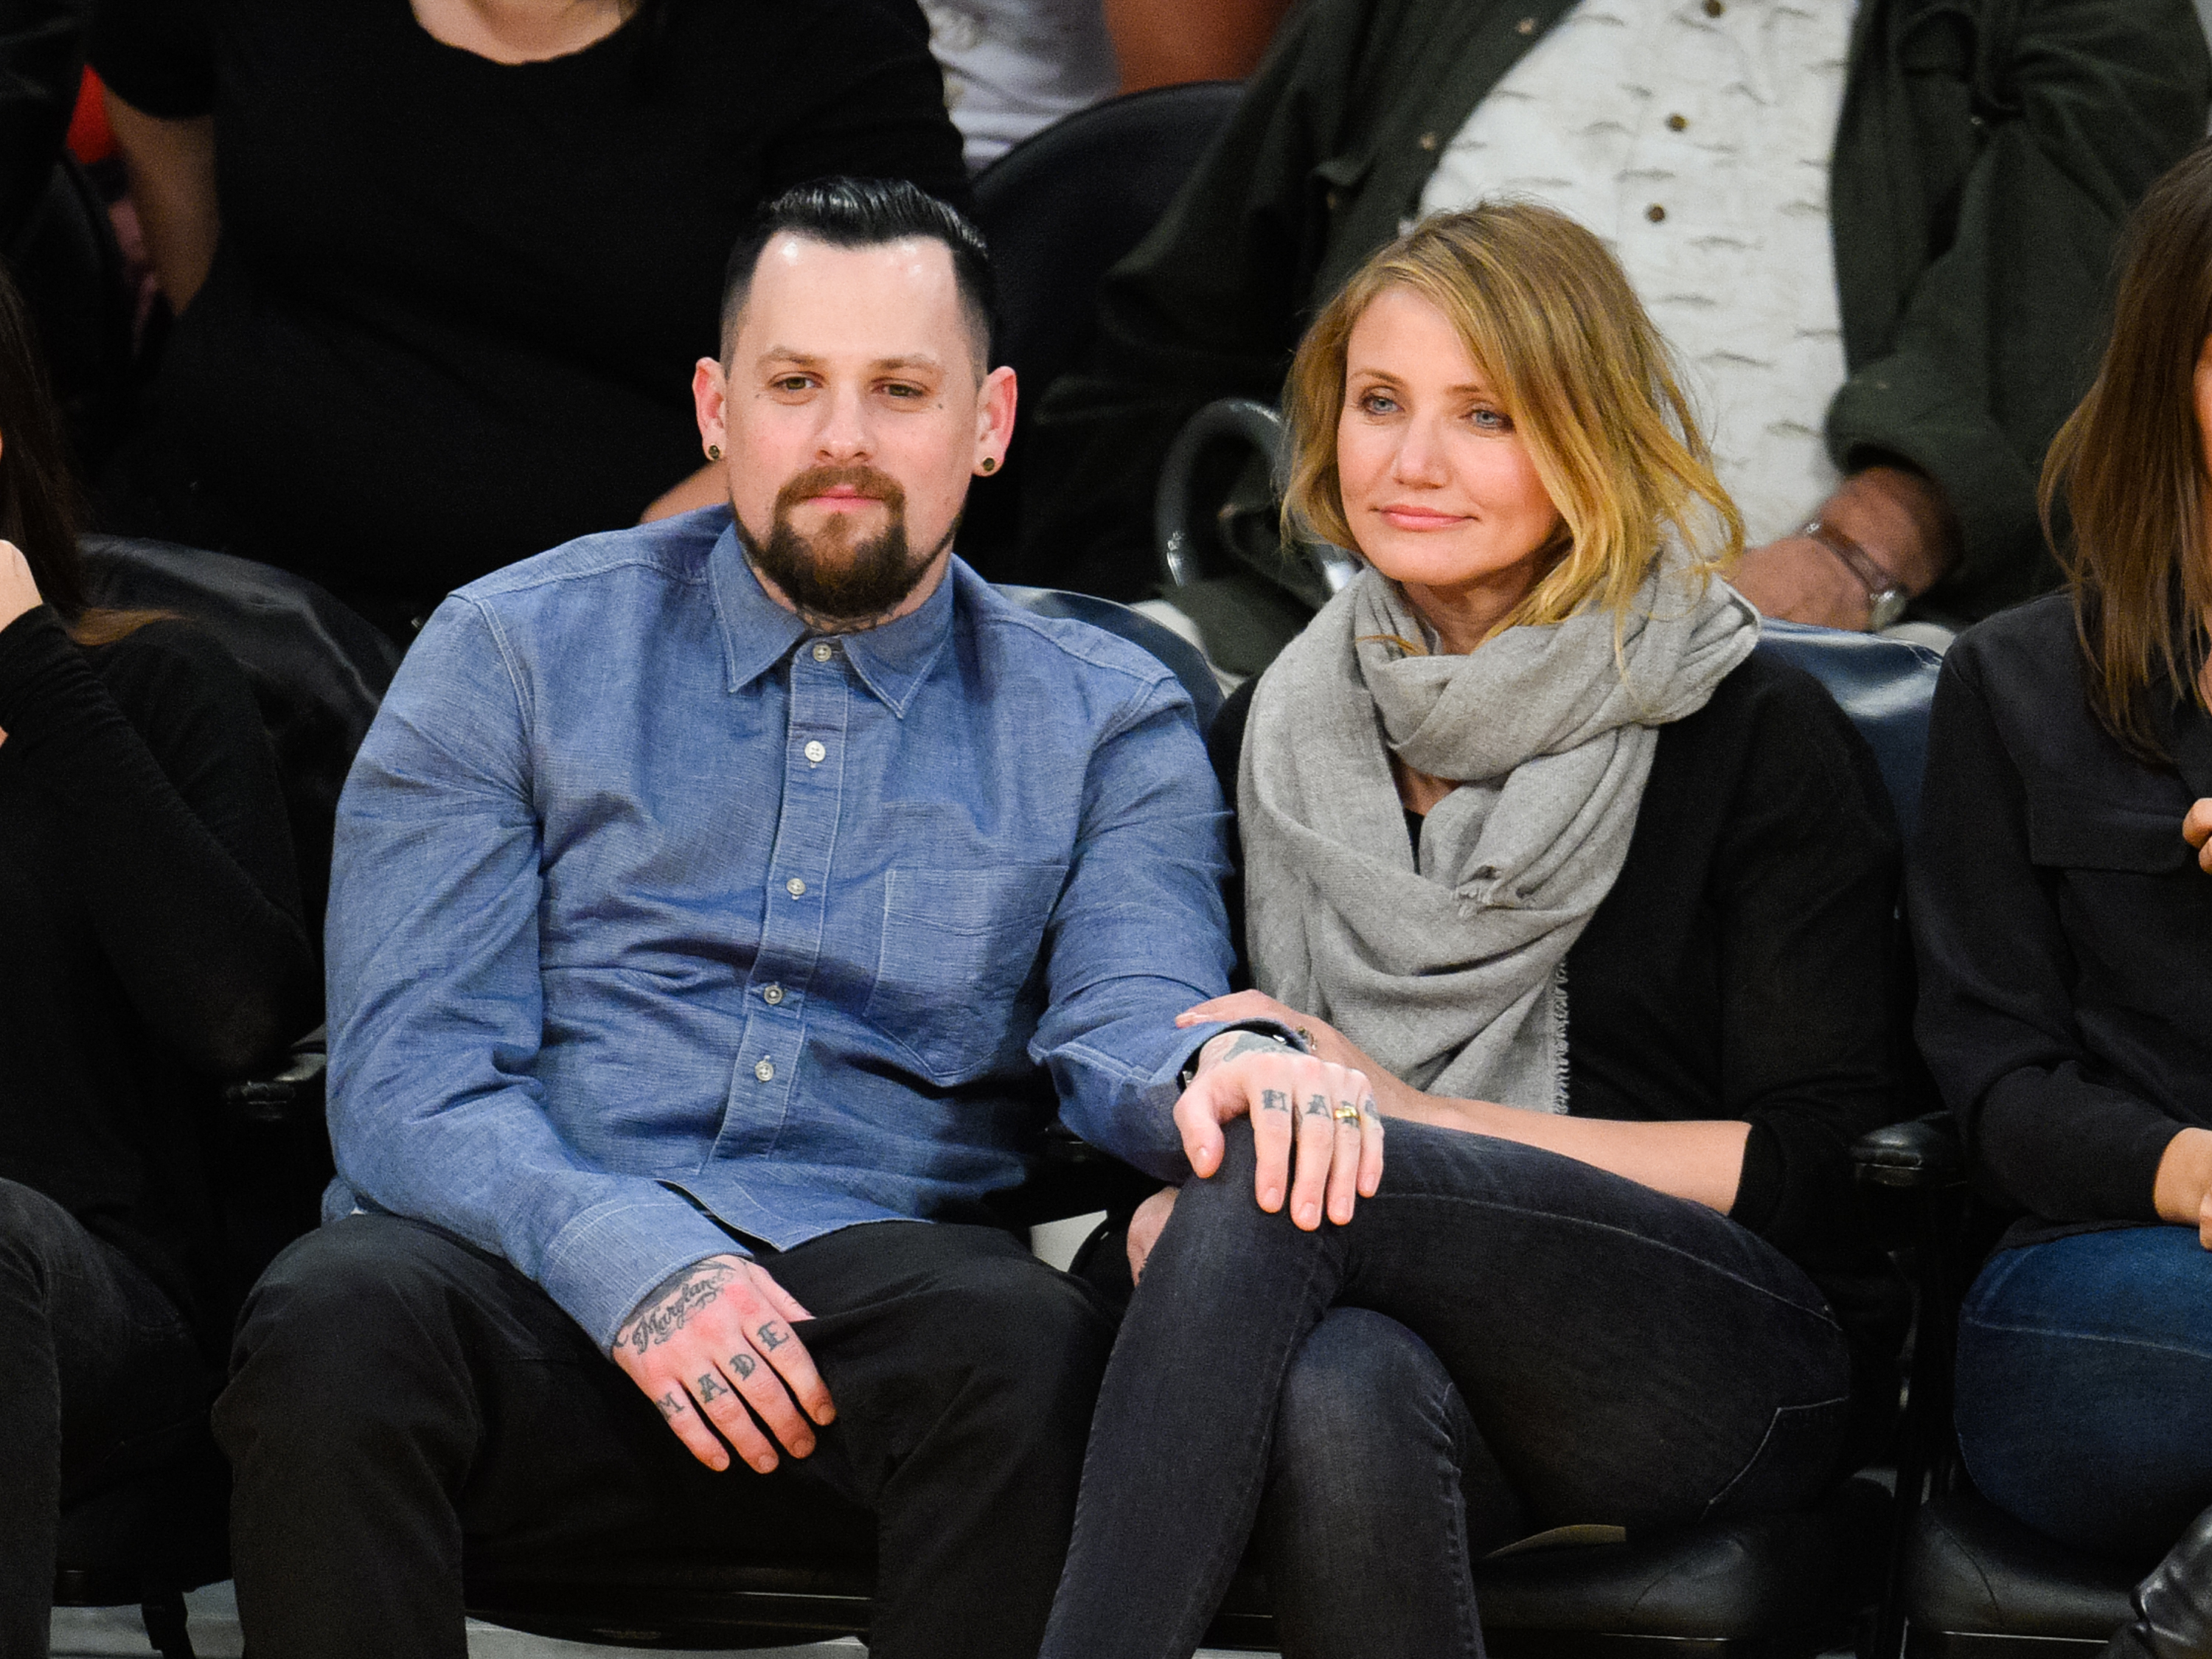 Benji Madden (L) and Cameron Diaz attend a basketball game between the Washington Wizards and the Los Angeles Lakers at Staples Center on January 27, 2015 in Los Angeles, California | Source: Getty Images